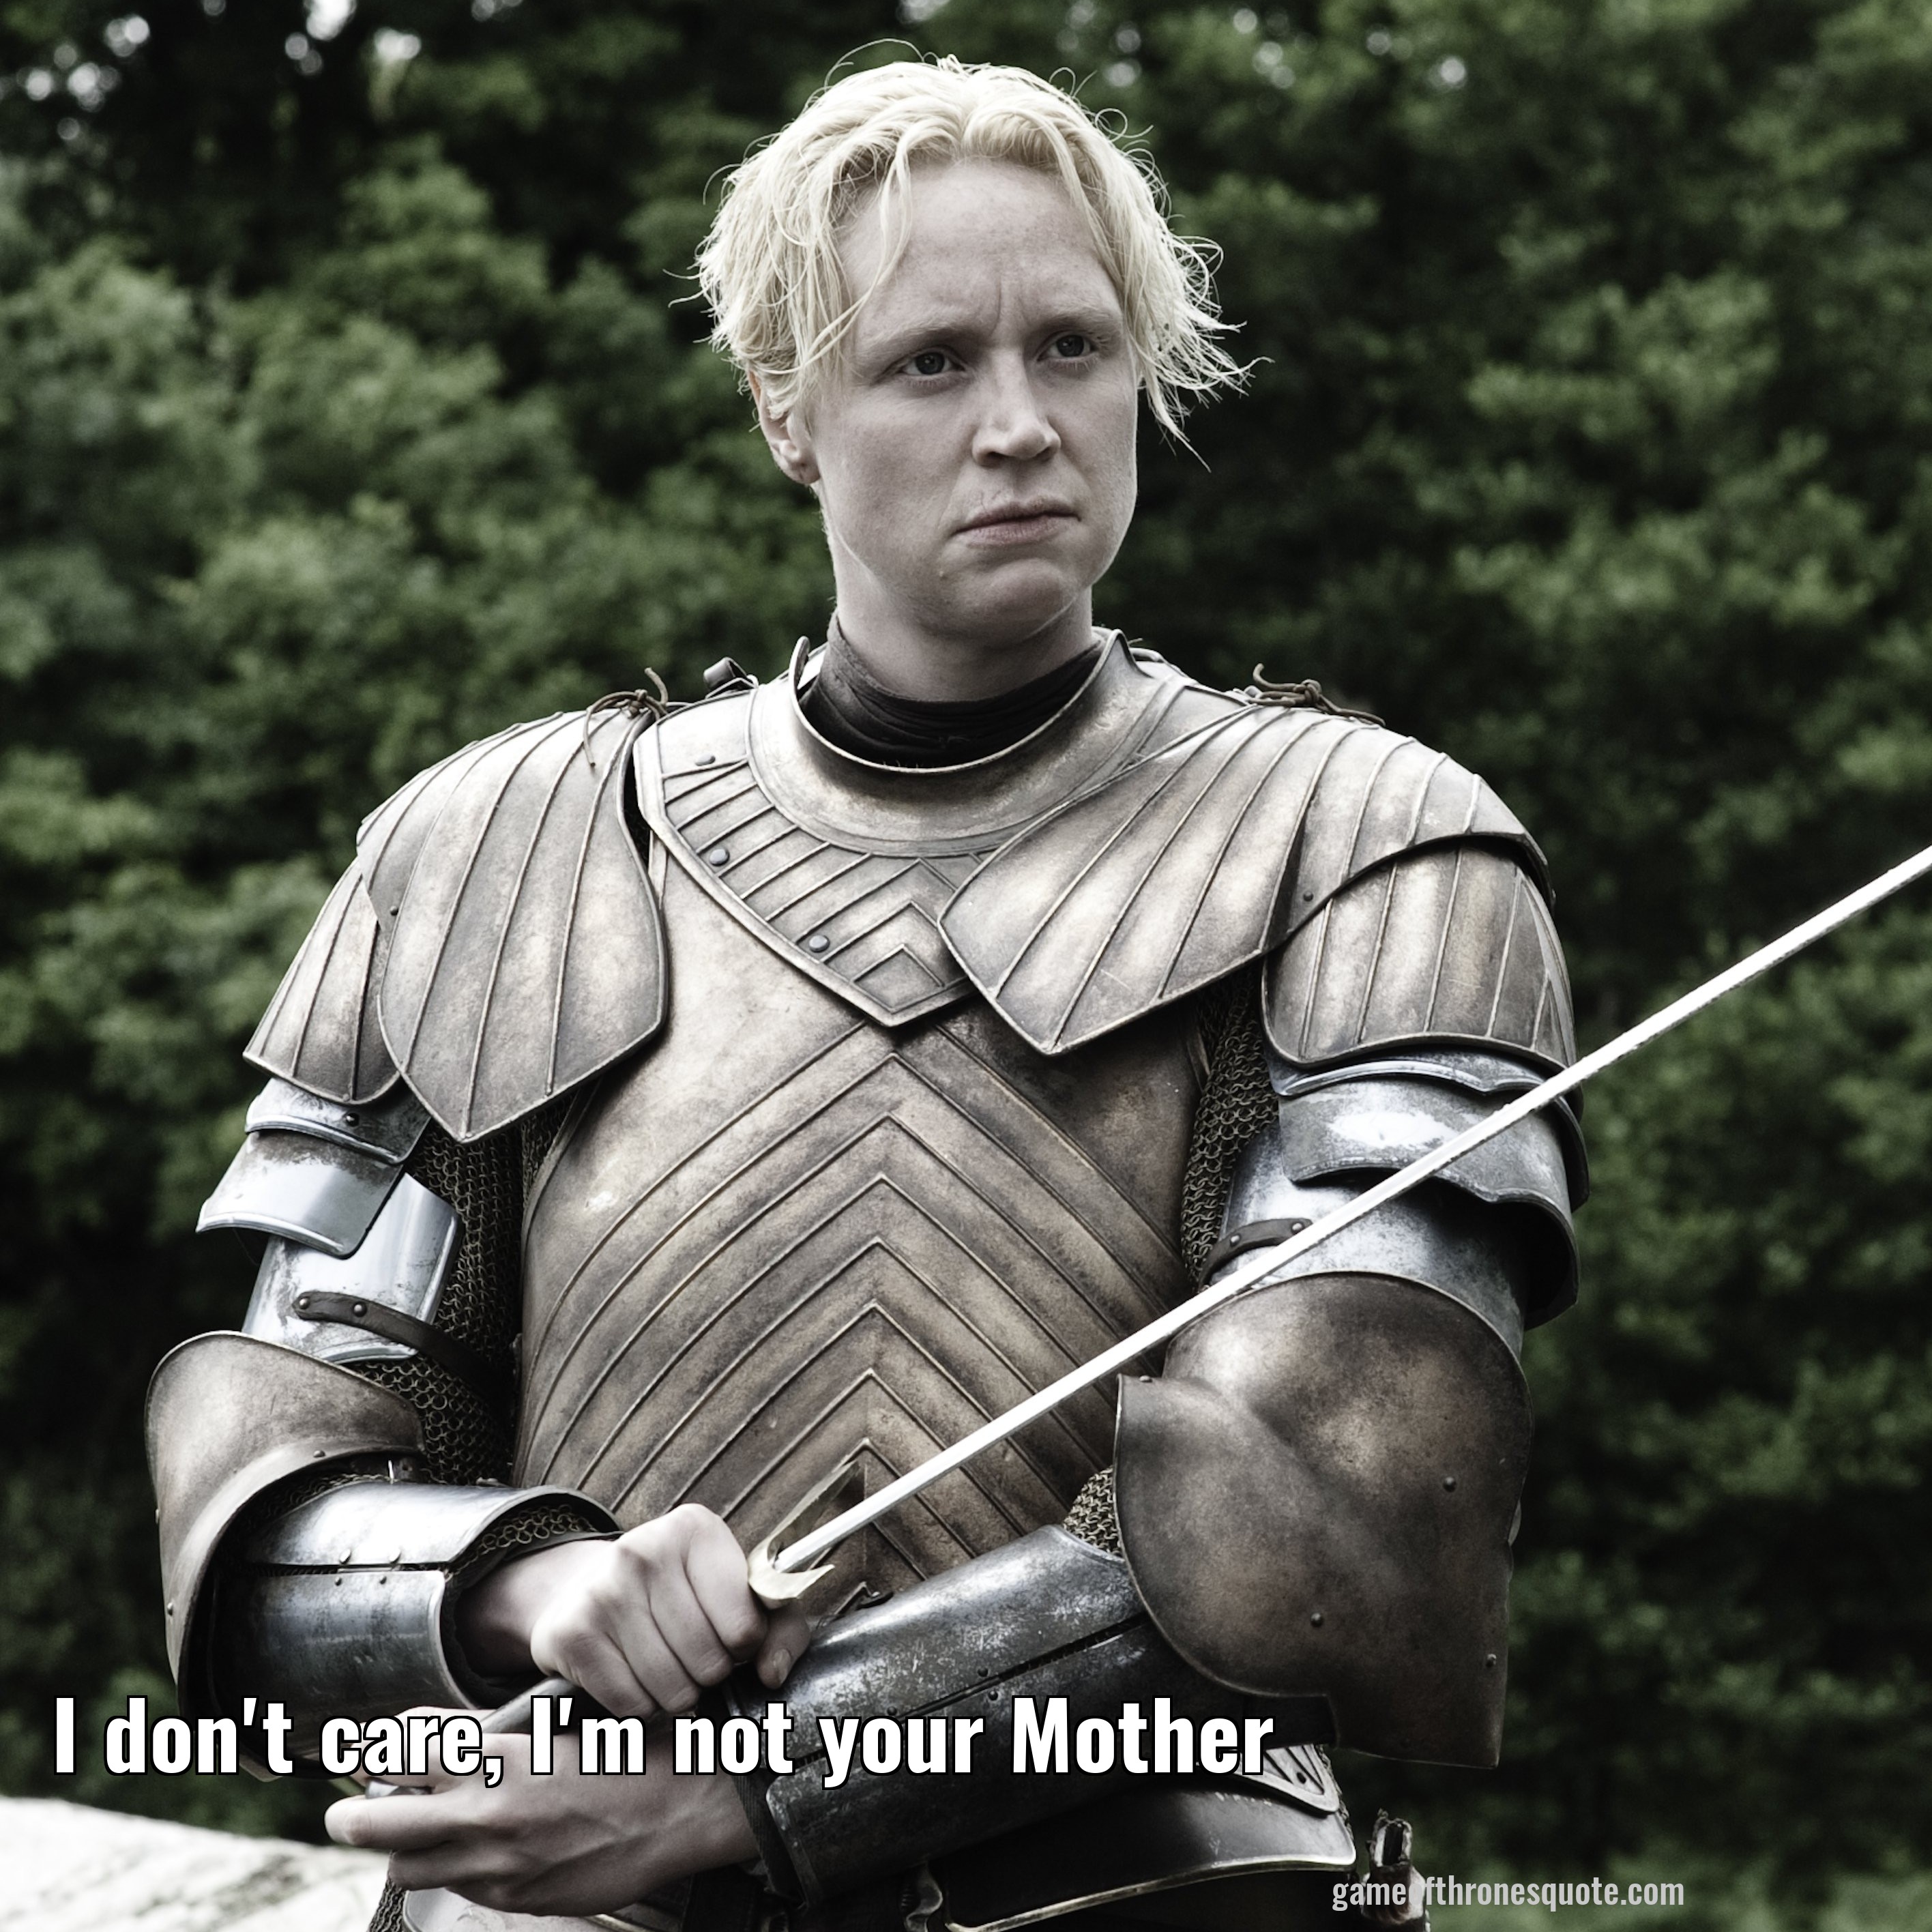 I don't care, I'm not your Mother